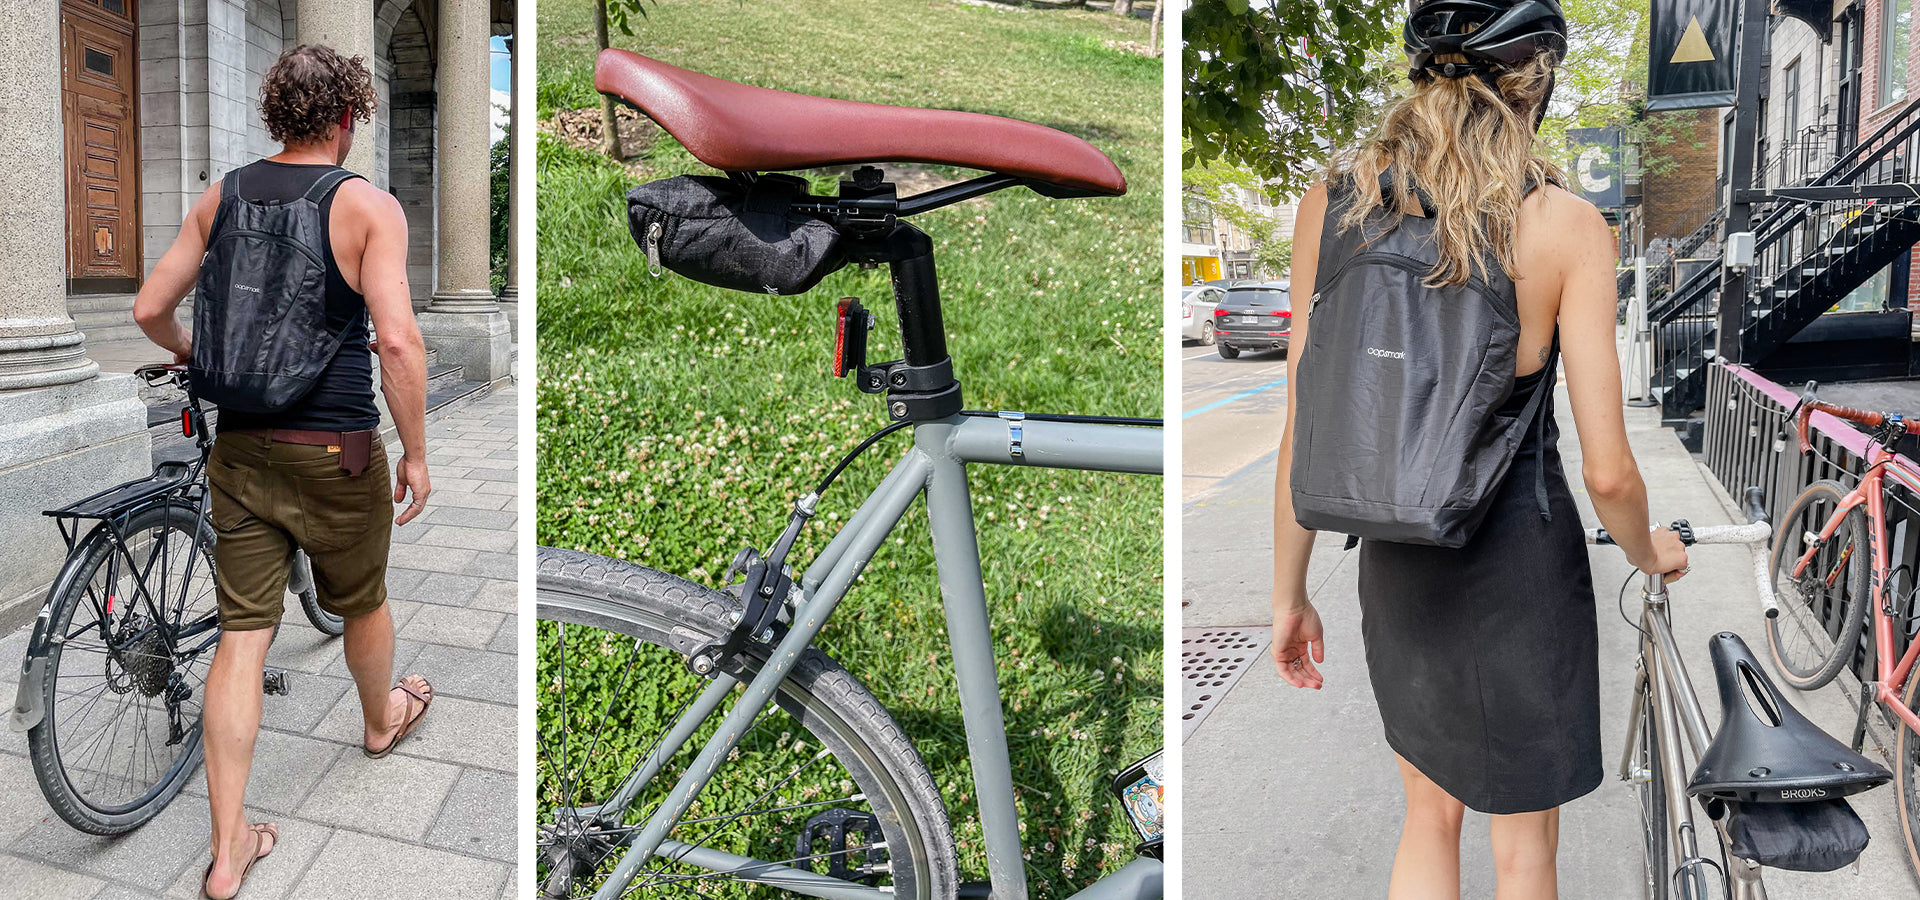 The 1 Less Bag: Helping Cyclists reduce their use of disposable plastic bags